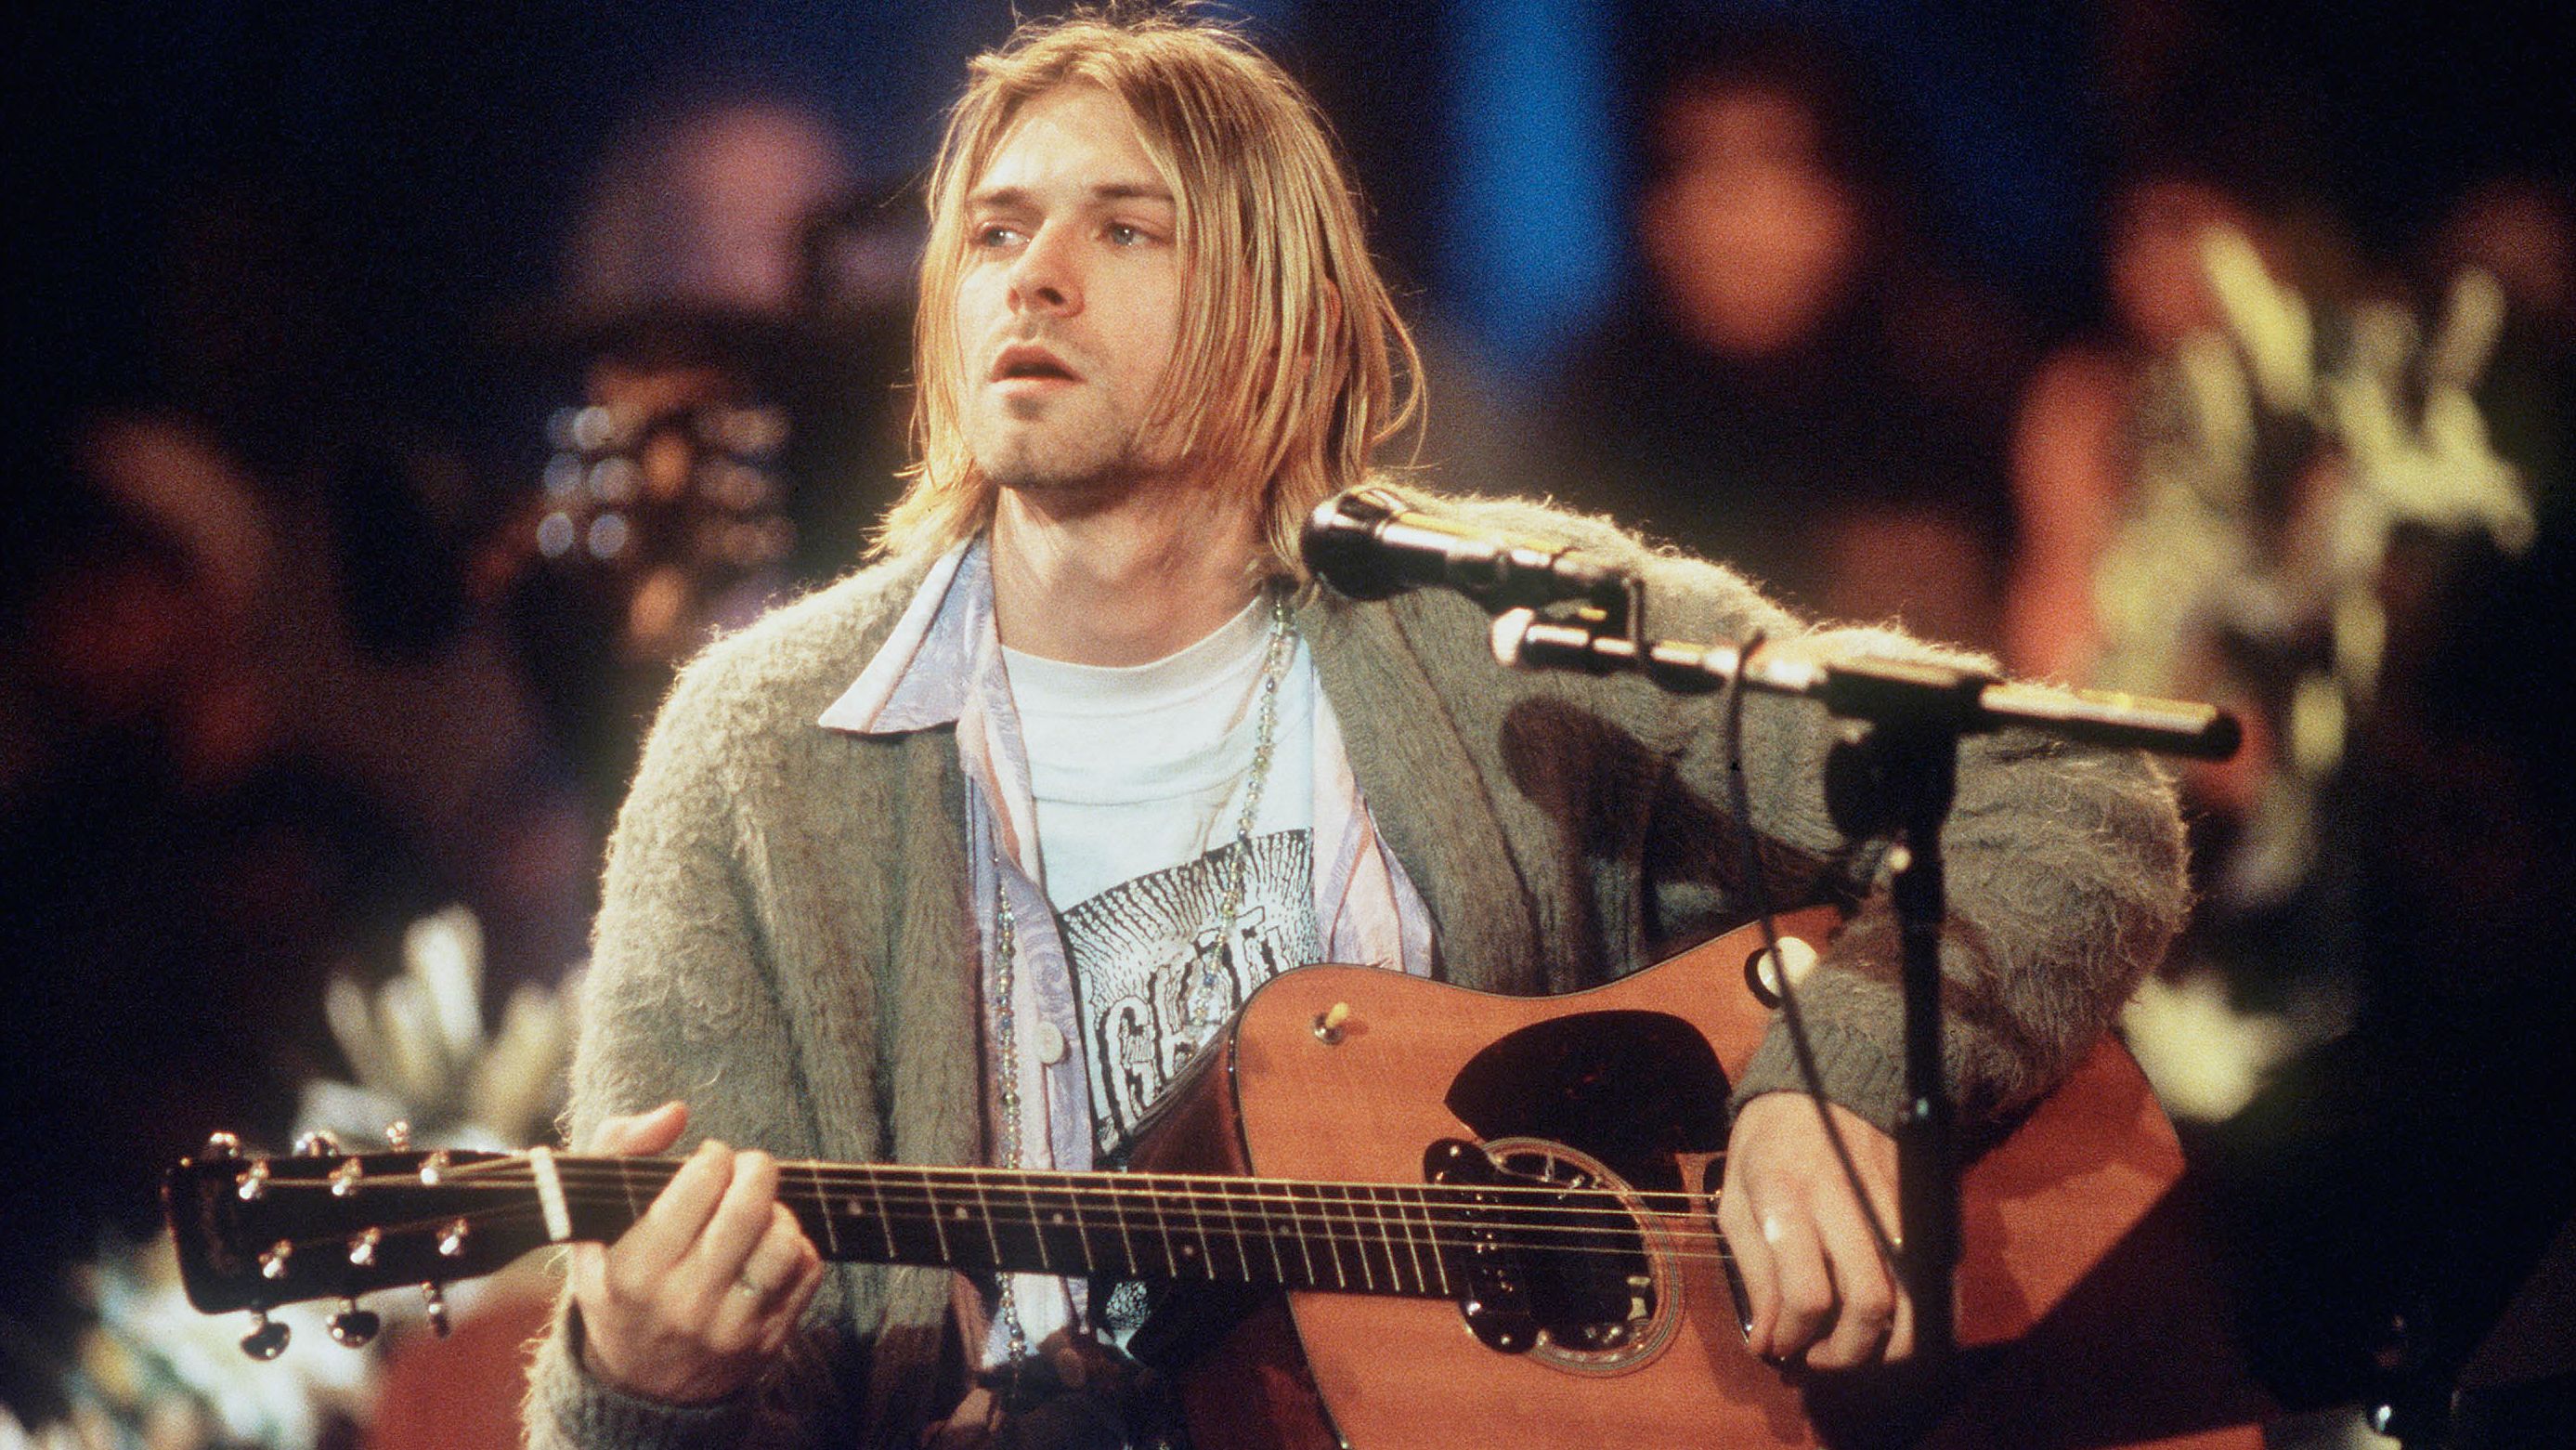 Kurt Cobain of Nirvana during a taping of MTV Unplugged in 1993.